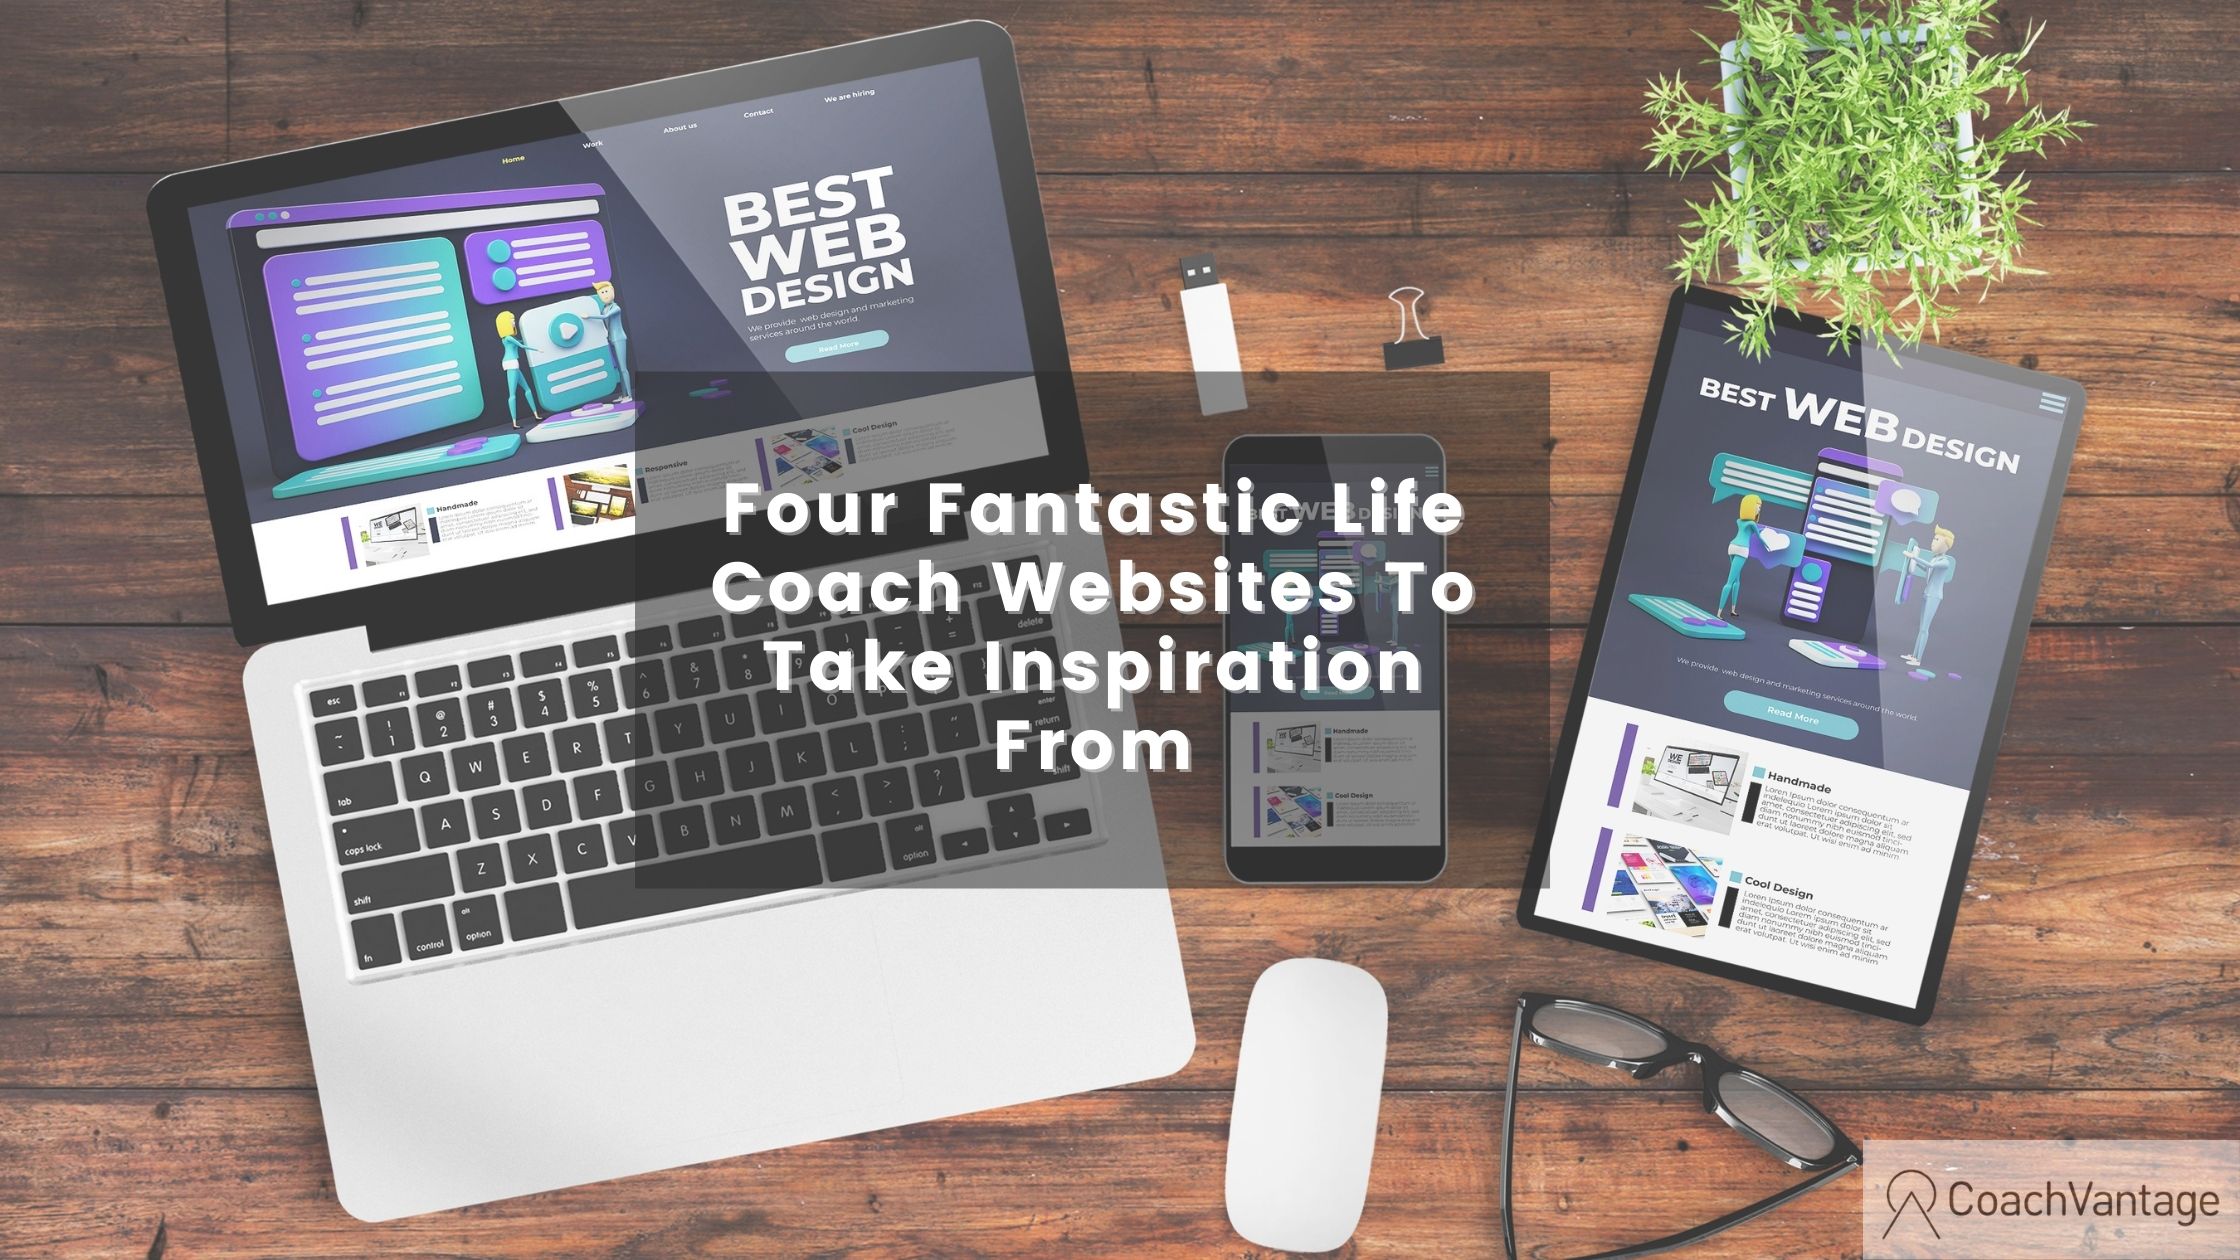 Four Fantastic Life Coach Websites To Take Inspiration From